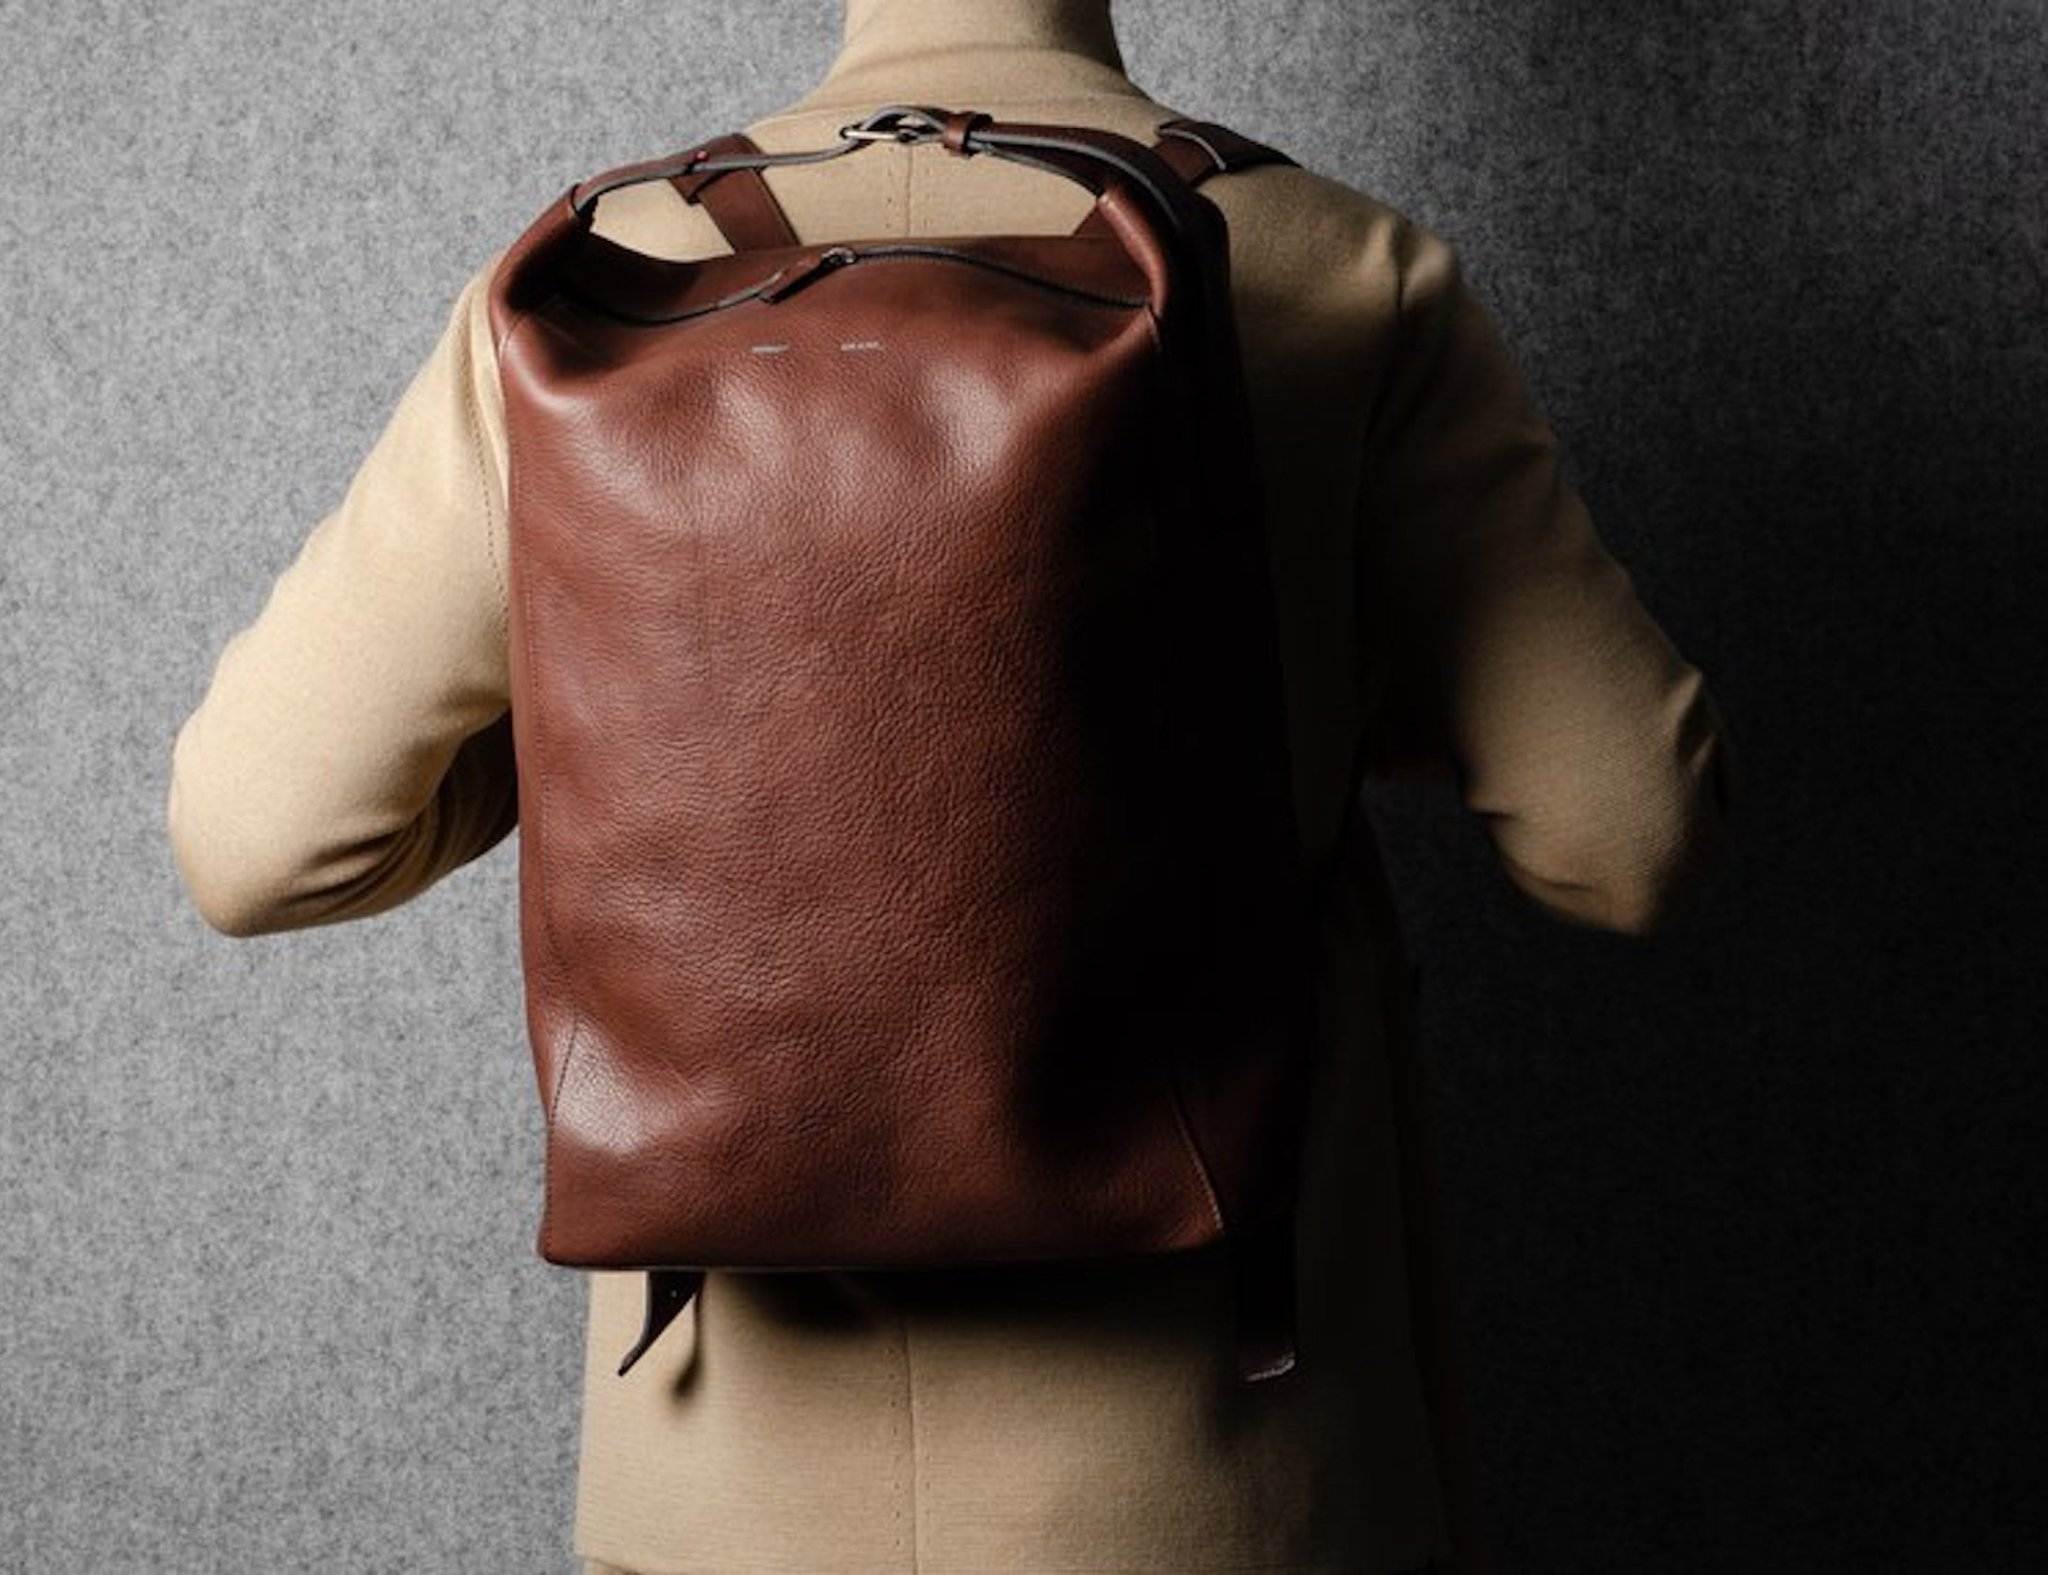 hardgraft Chestnut belted leather backpack has a padded laptop compartment